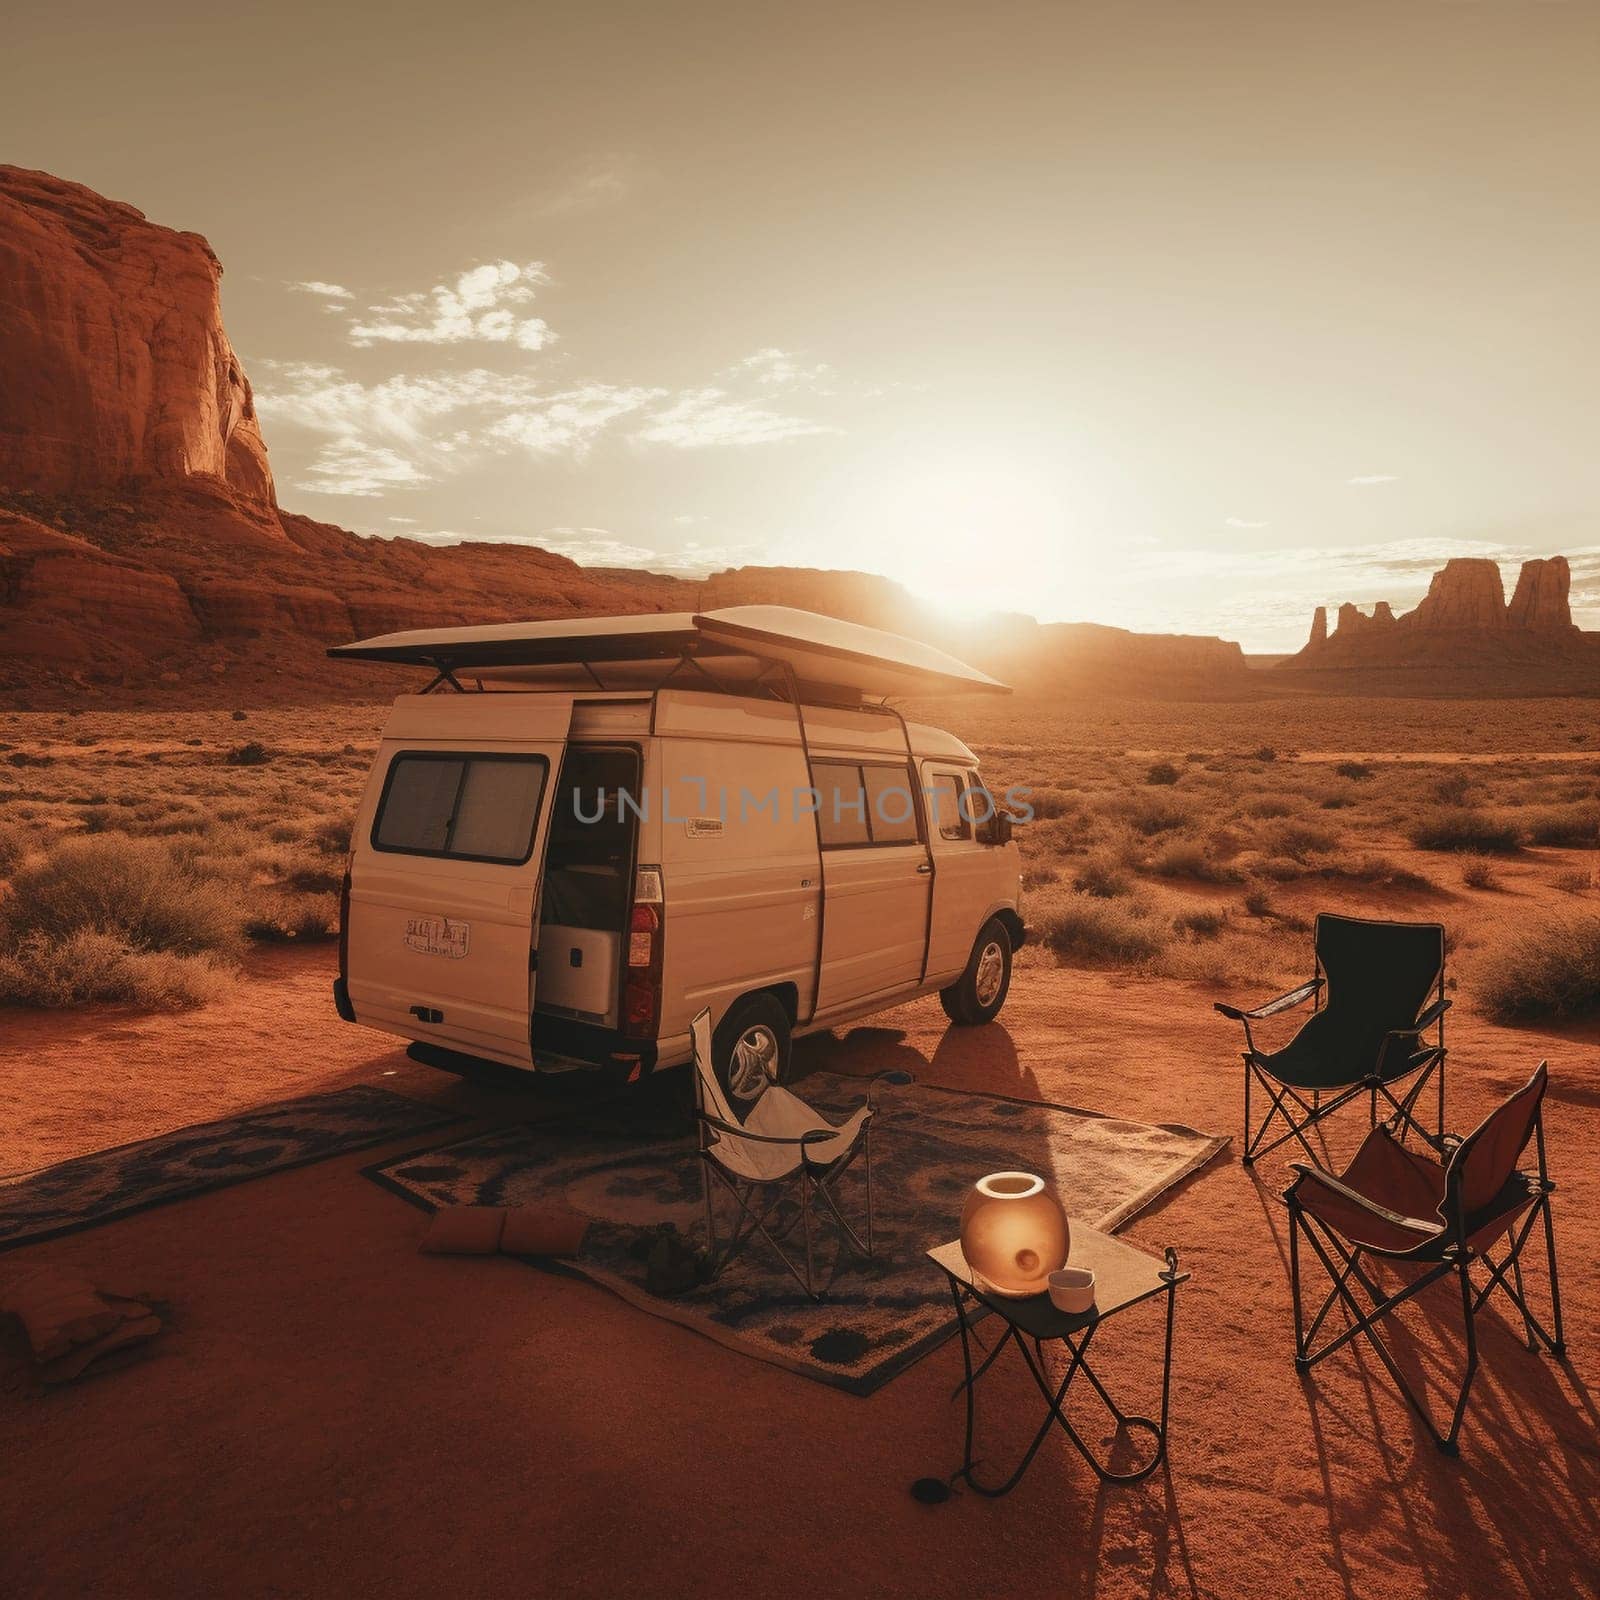 Camper Van on the Edge of a Desert Canyon by Sahin